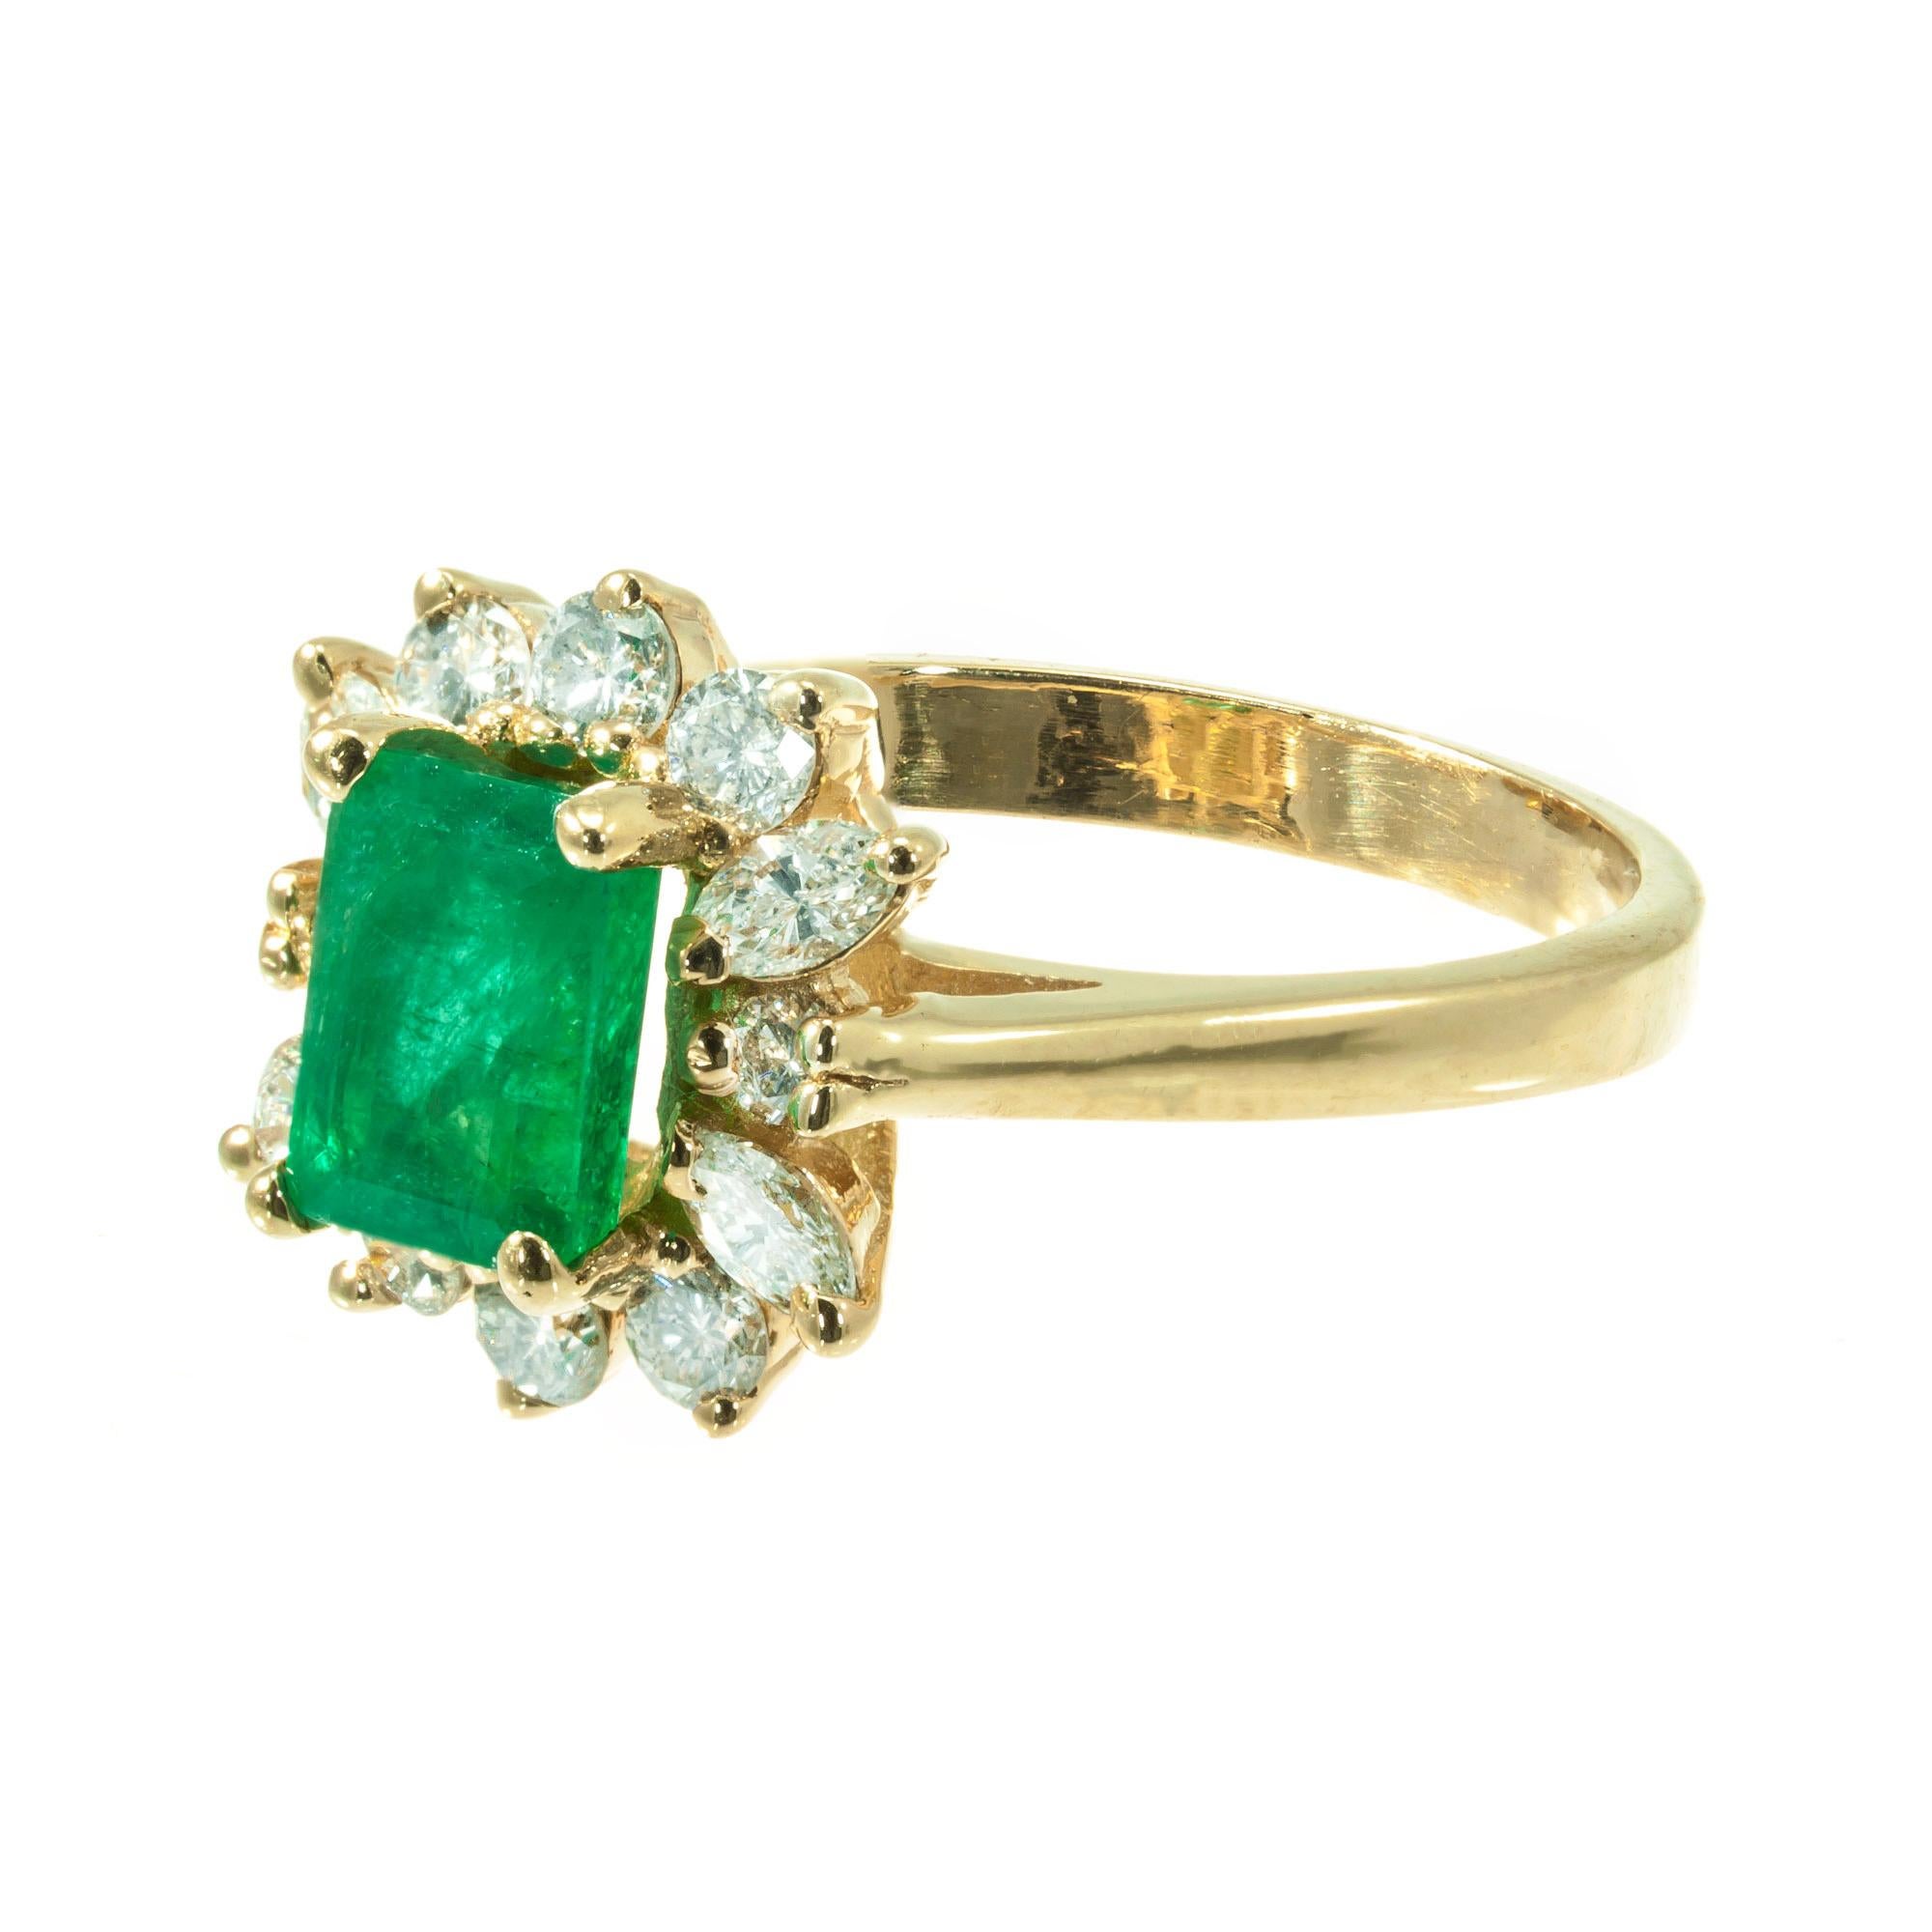 GIA certified emerald and diamond engagement ring. GIA certified, natural color, minor clarity enhancement only. Surrounded by a bright sparkly halo of round and marquise diamonds in a 14k yellow gold setting. 

1 octagonal green I emerald Approx.